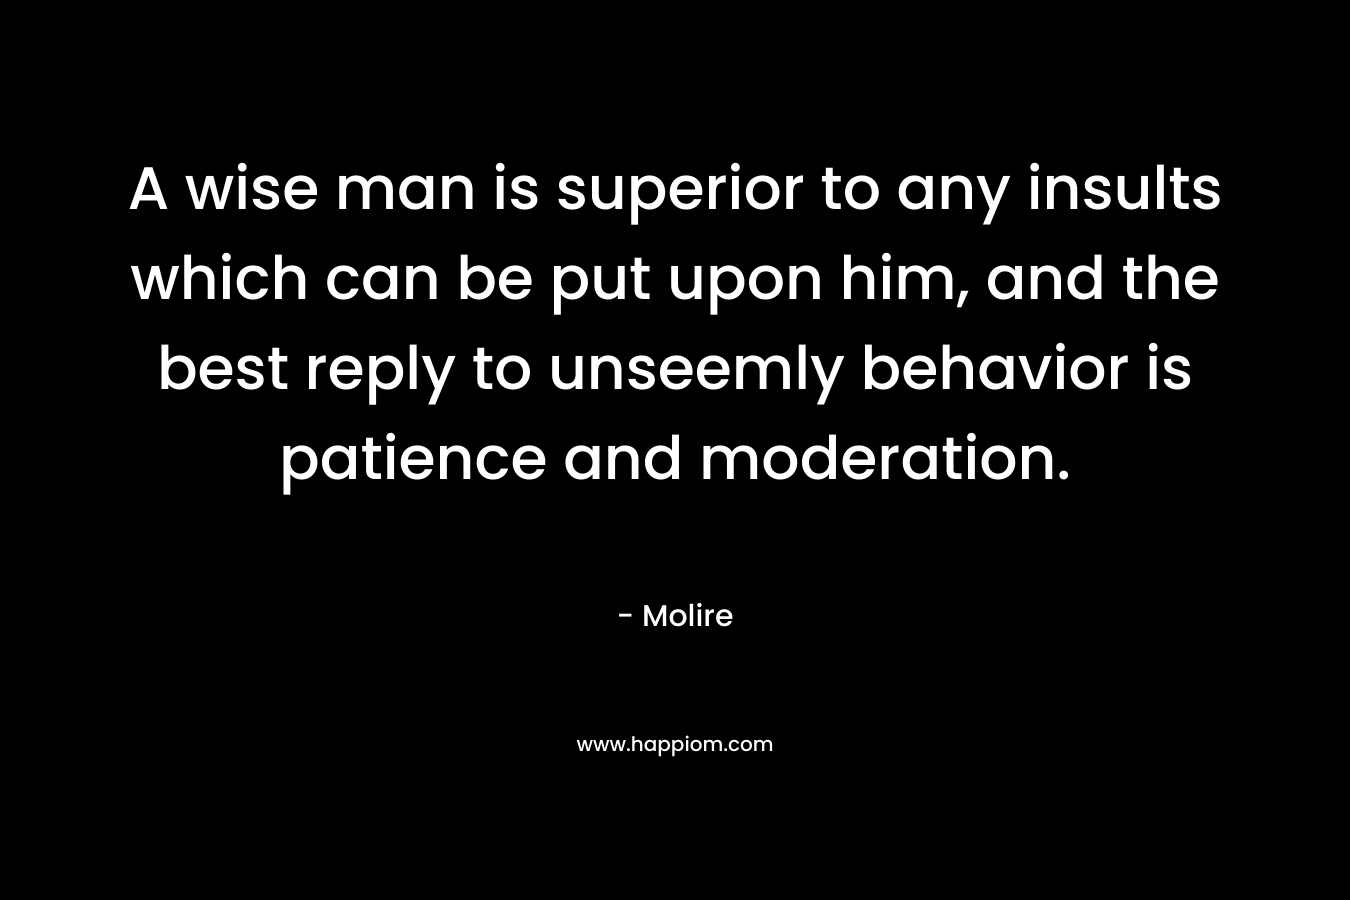 A wise man is superior to any insults which can be put upon him, and the best reply to unseemly behavior is patience and moderation. – Molire